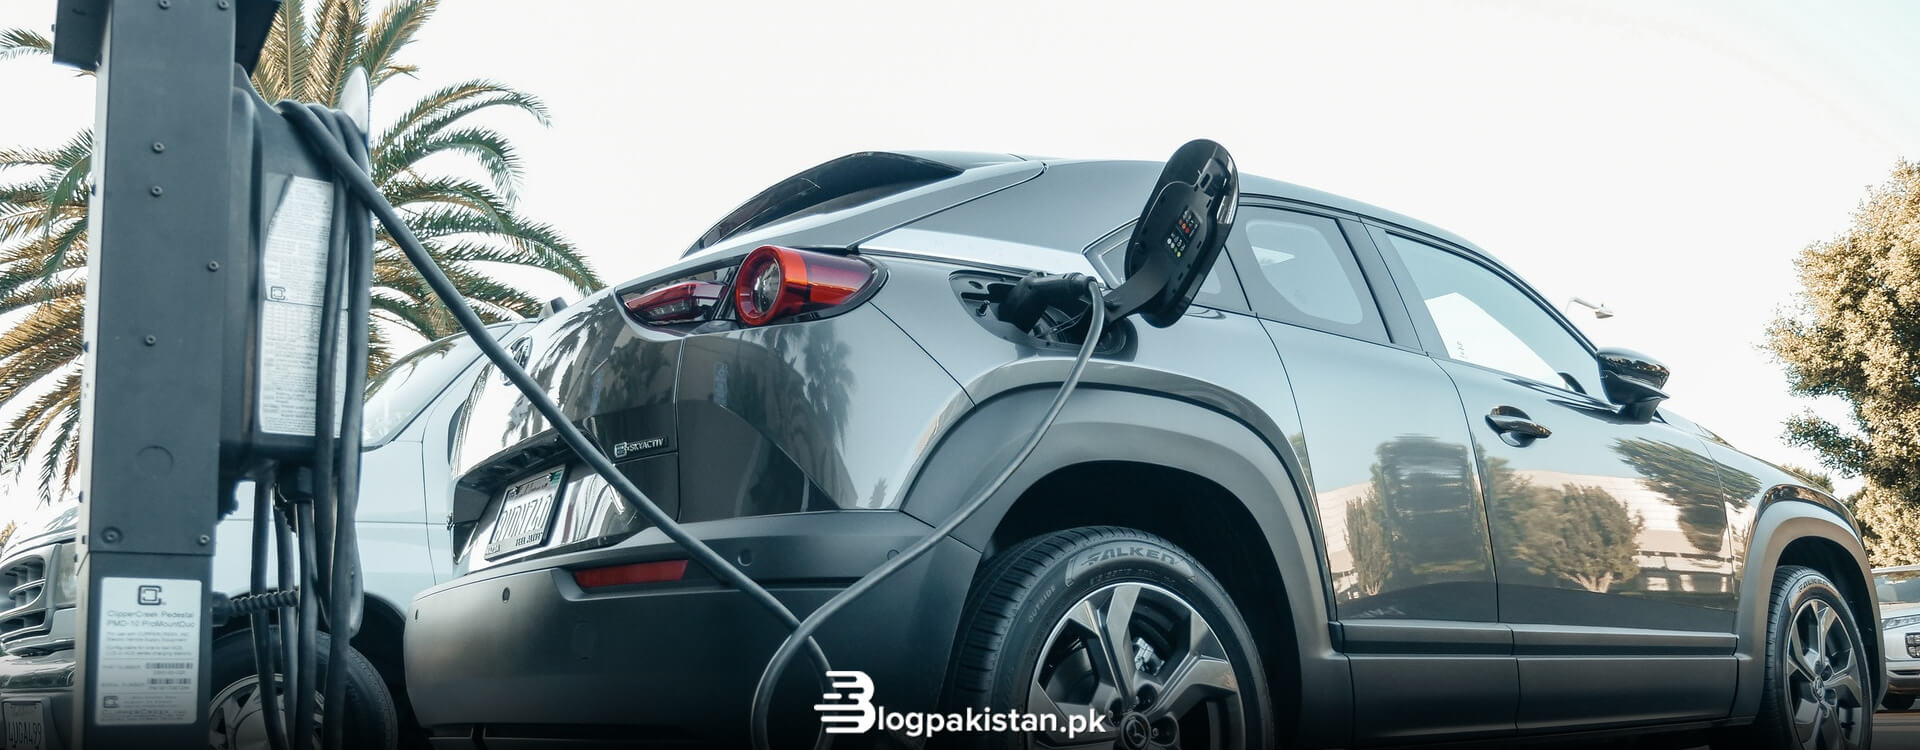 Electric Car Charging Stations in Islamabad – Address & Contact Info